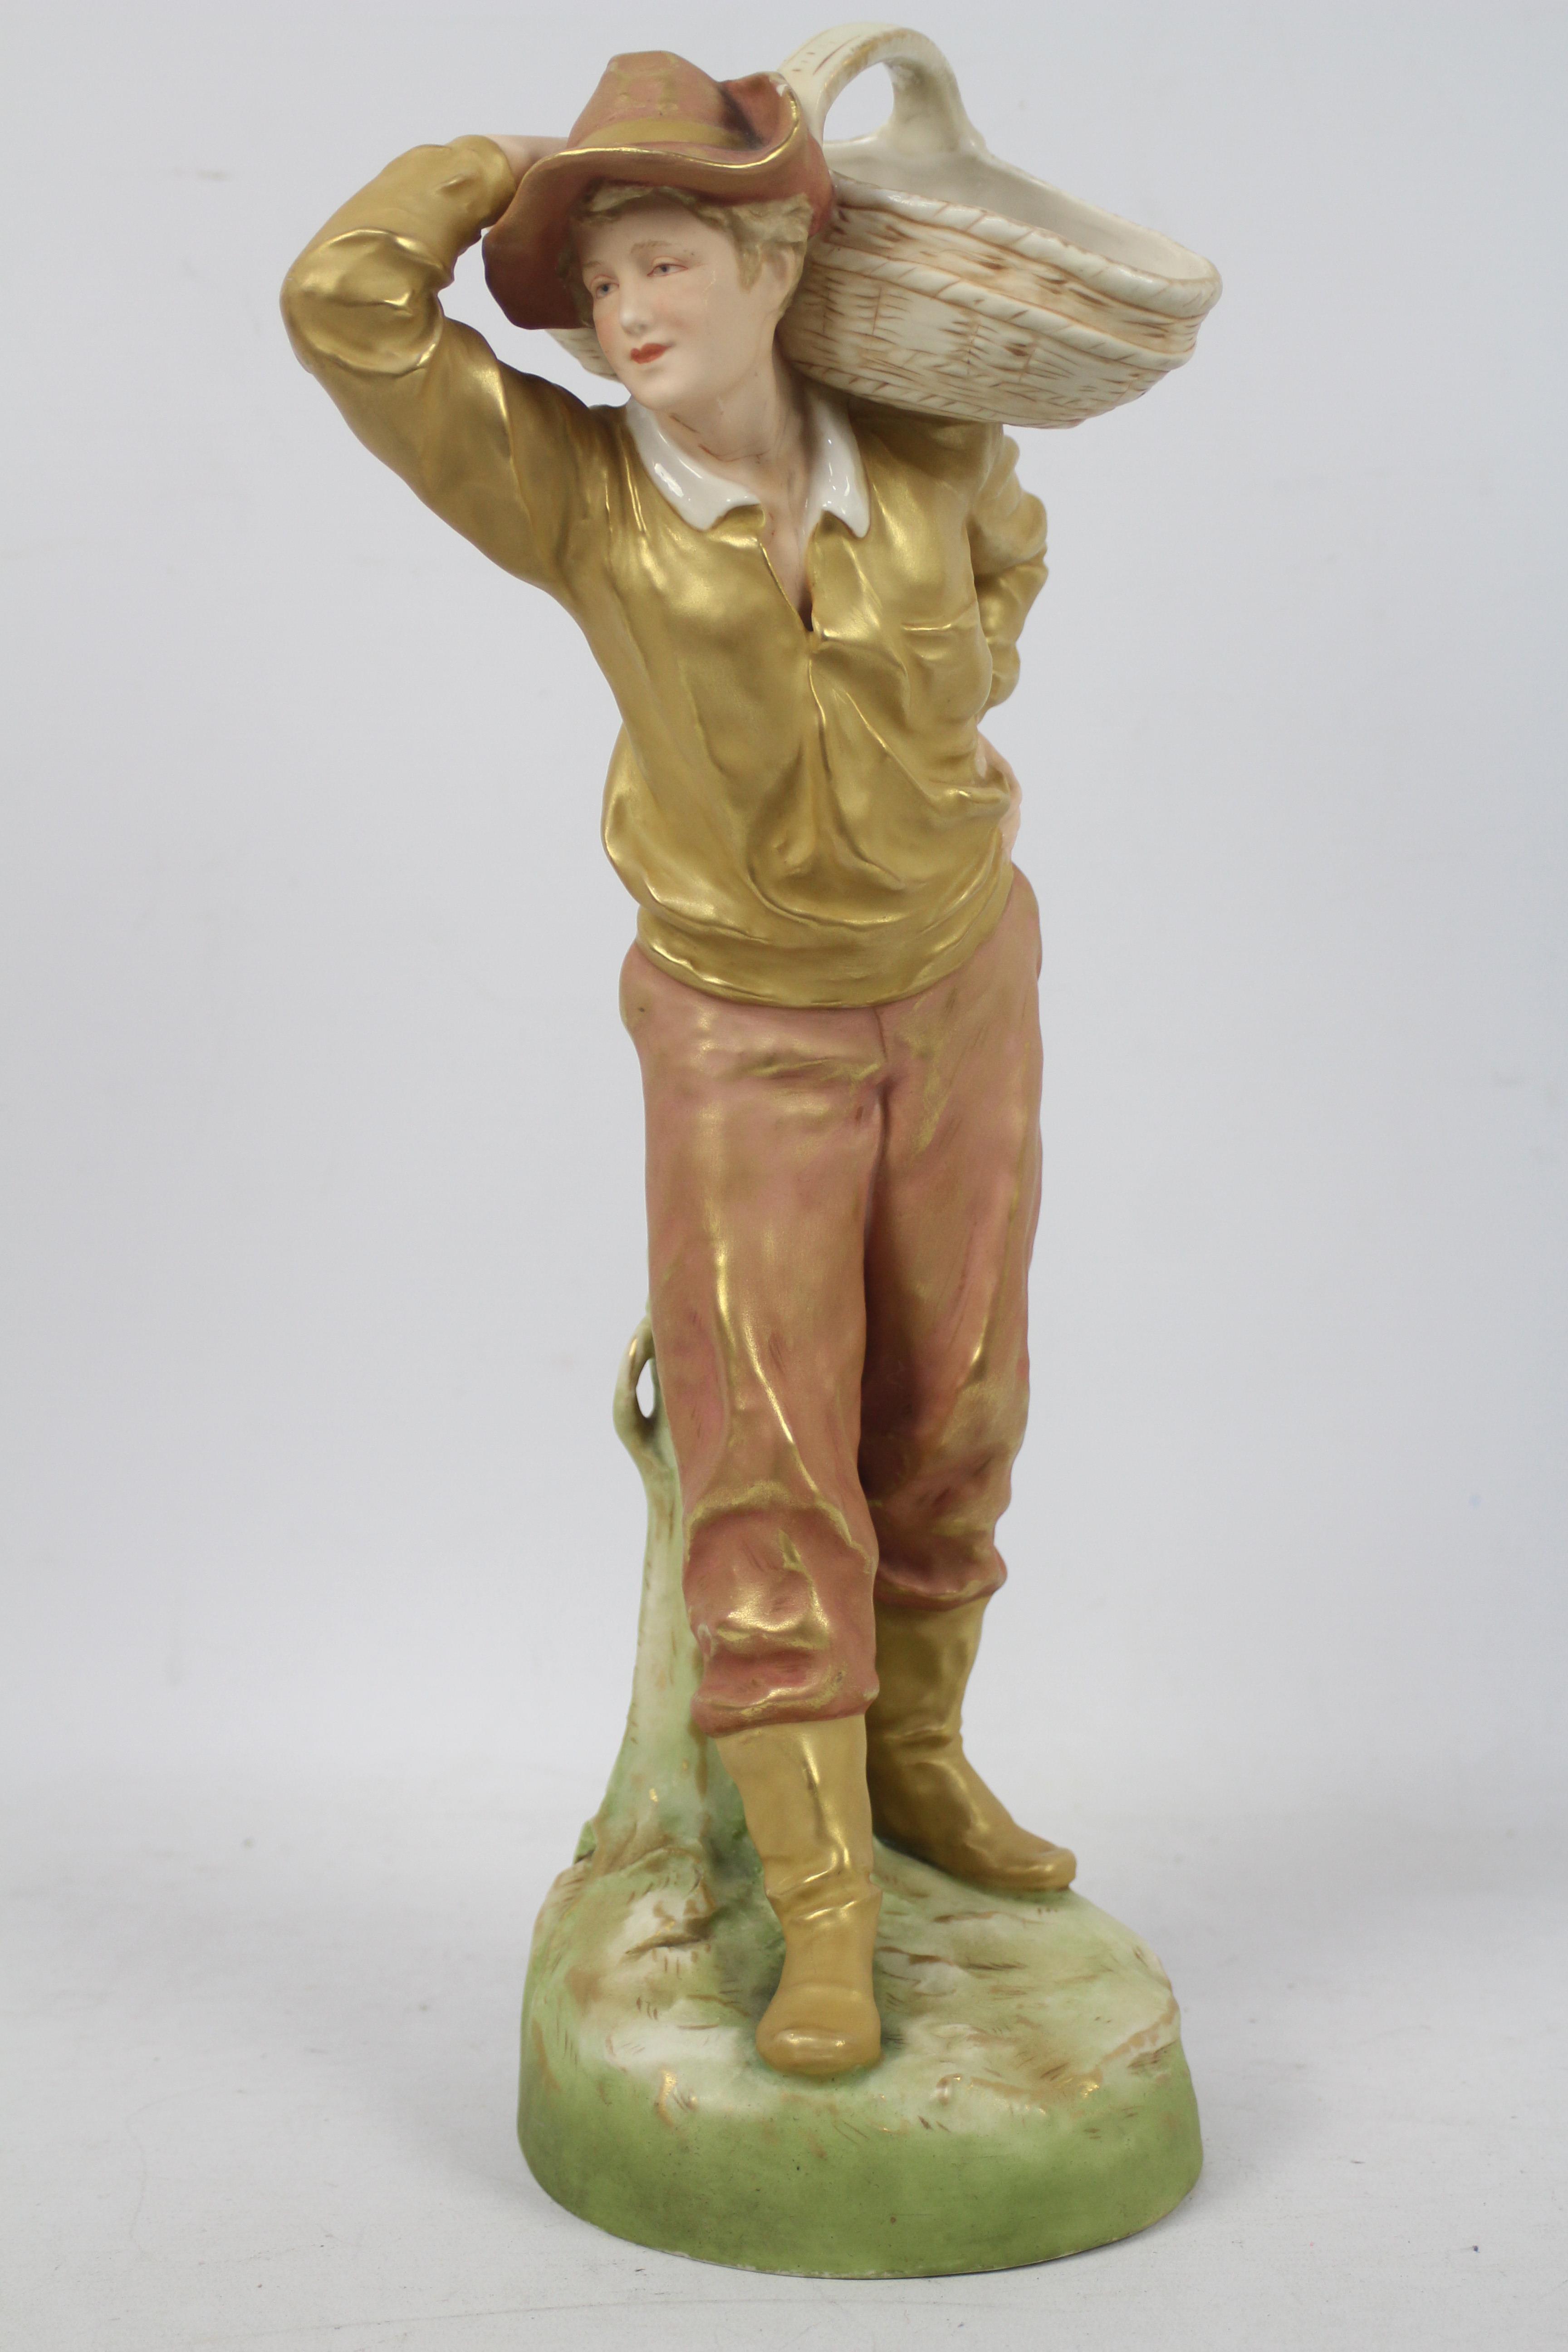 Royal Dux - A figure depicting a male carrying a basket on his shoulder,